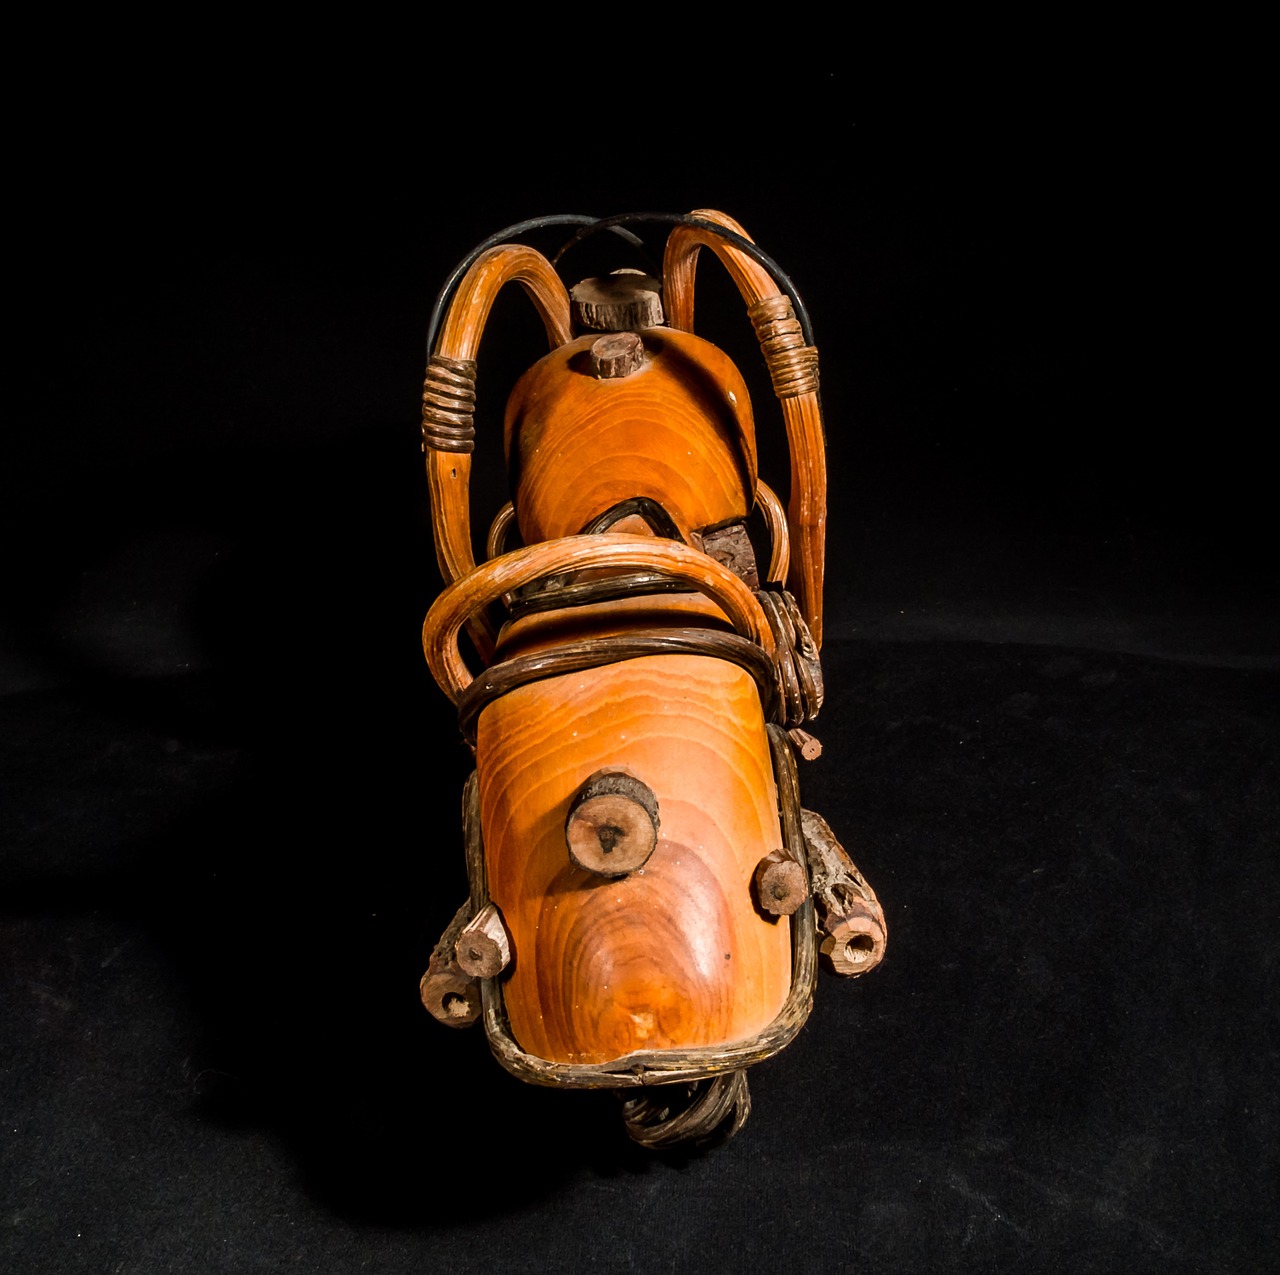 wooden motorcycle wood model art from thailand free photo